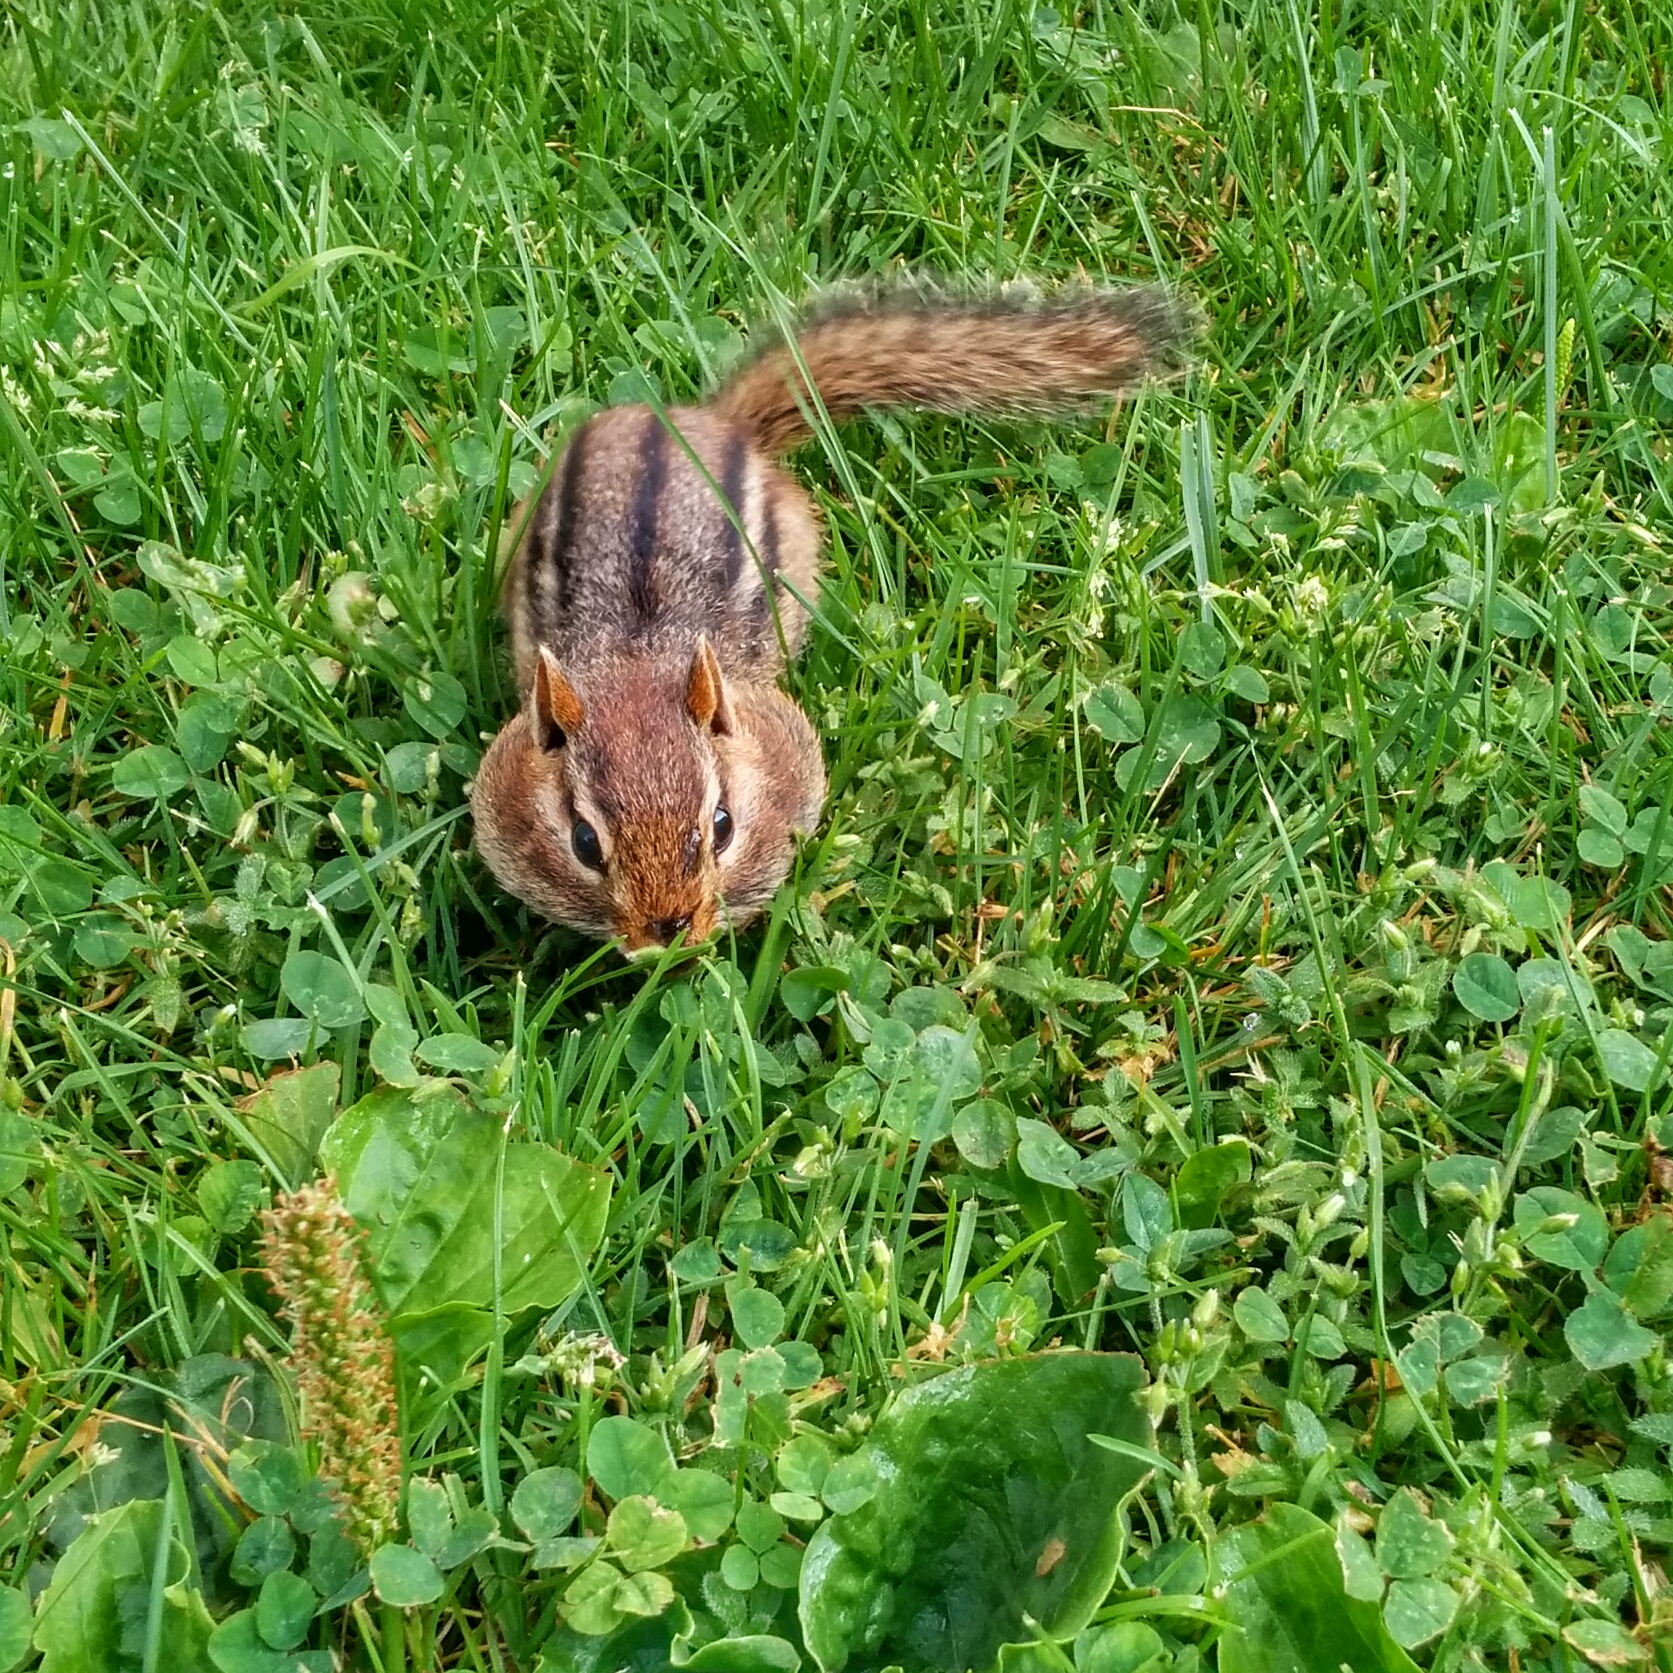 a squirrel is sitting on the grass eating